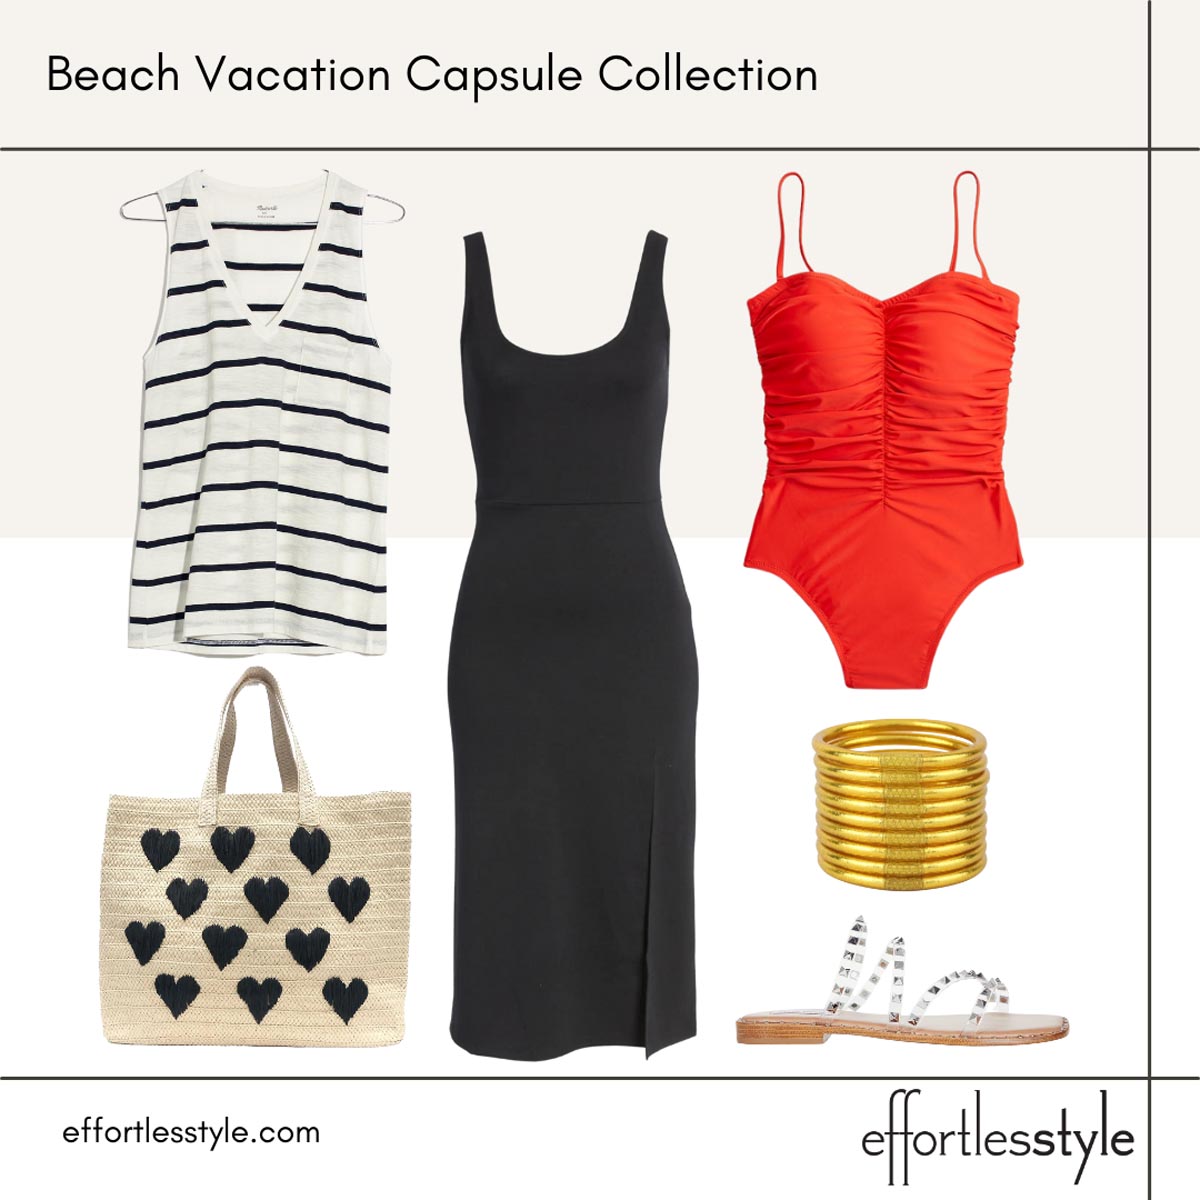 Beach vacation capsule styled looks midi dress how to wear a dress over a bathing suit how to wear a dress as a cover up midi dress as cover up straw tote for spring straw bag for summer